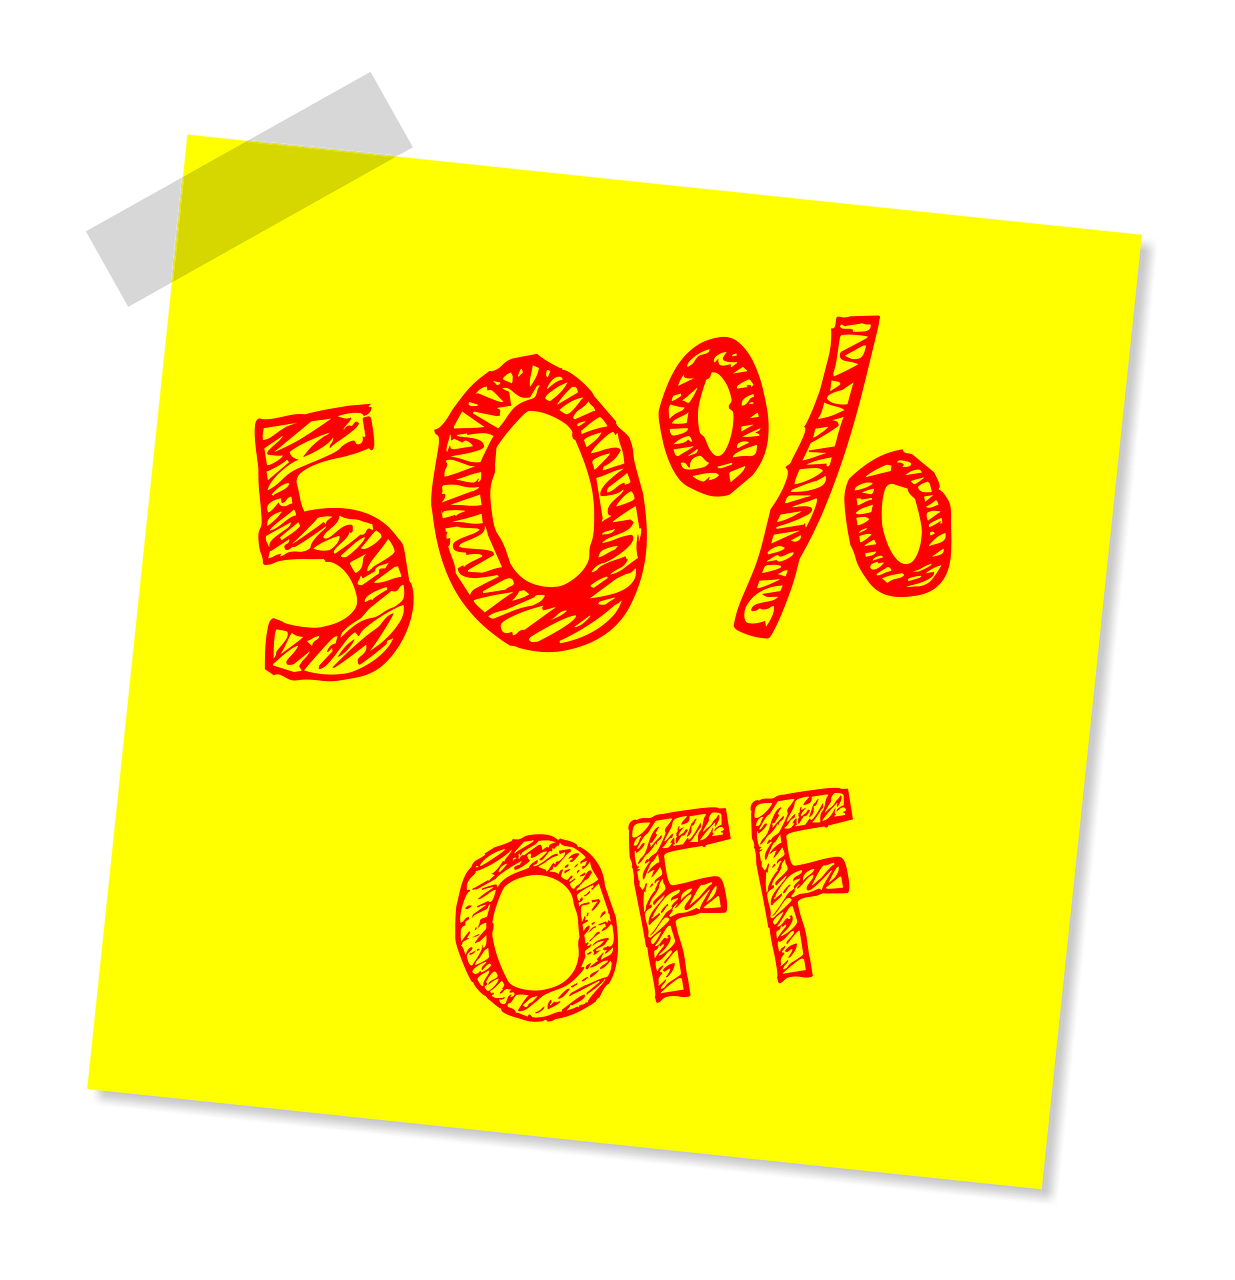 fifty percent off discount sale free photo